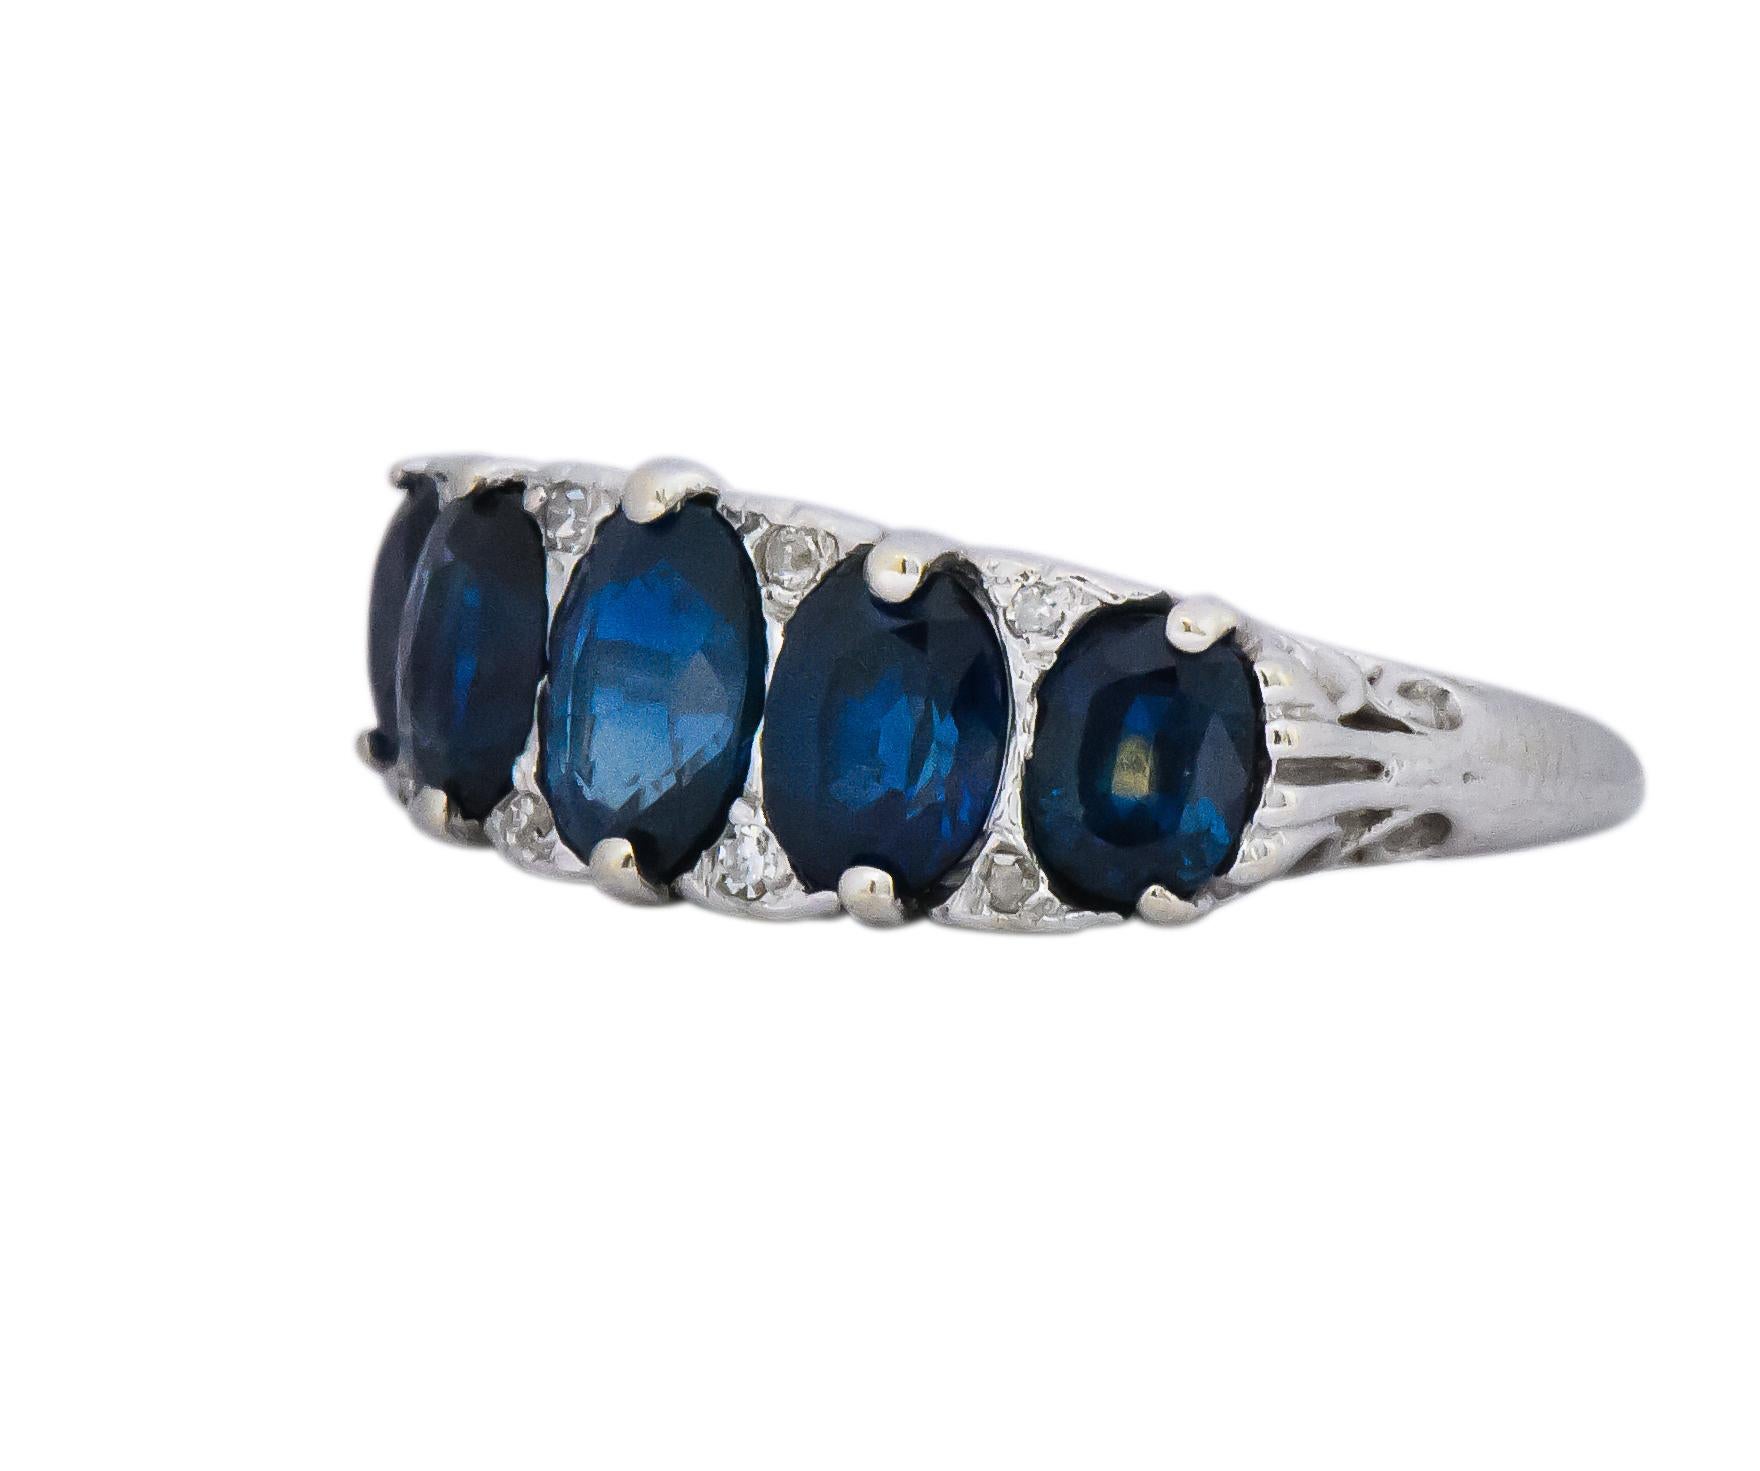 Set to the front with 5 graduated oval cut sapphires, weighing approximately 3.00 carats, deep bright blue and well matched

Accented by single cut diamonds, weighing approximately 0.05 carat total, eye-clean and white

Tested as 14 karat

CTW: